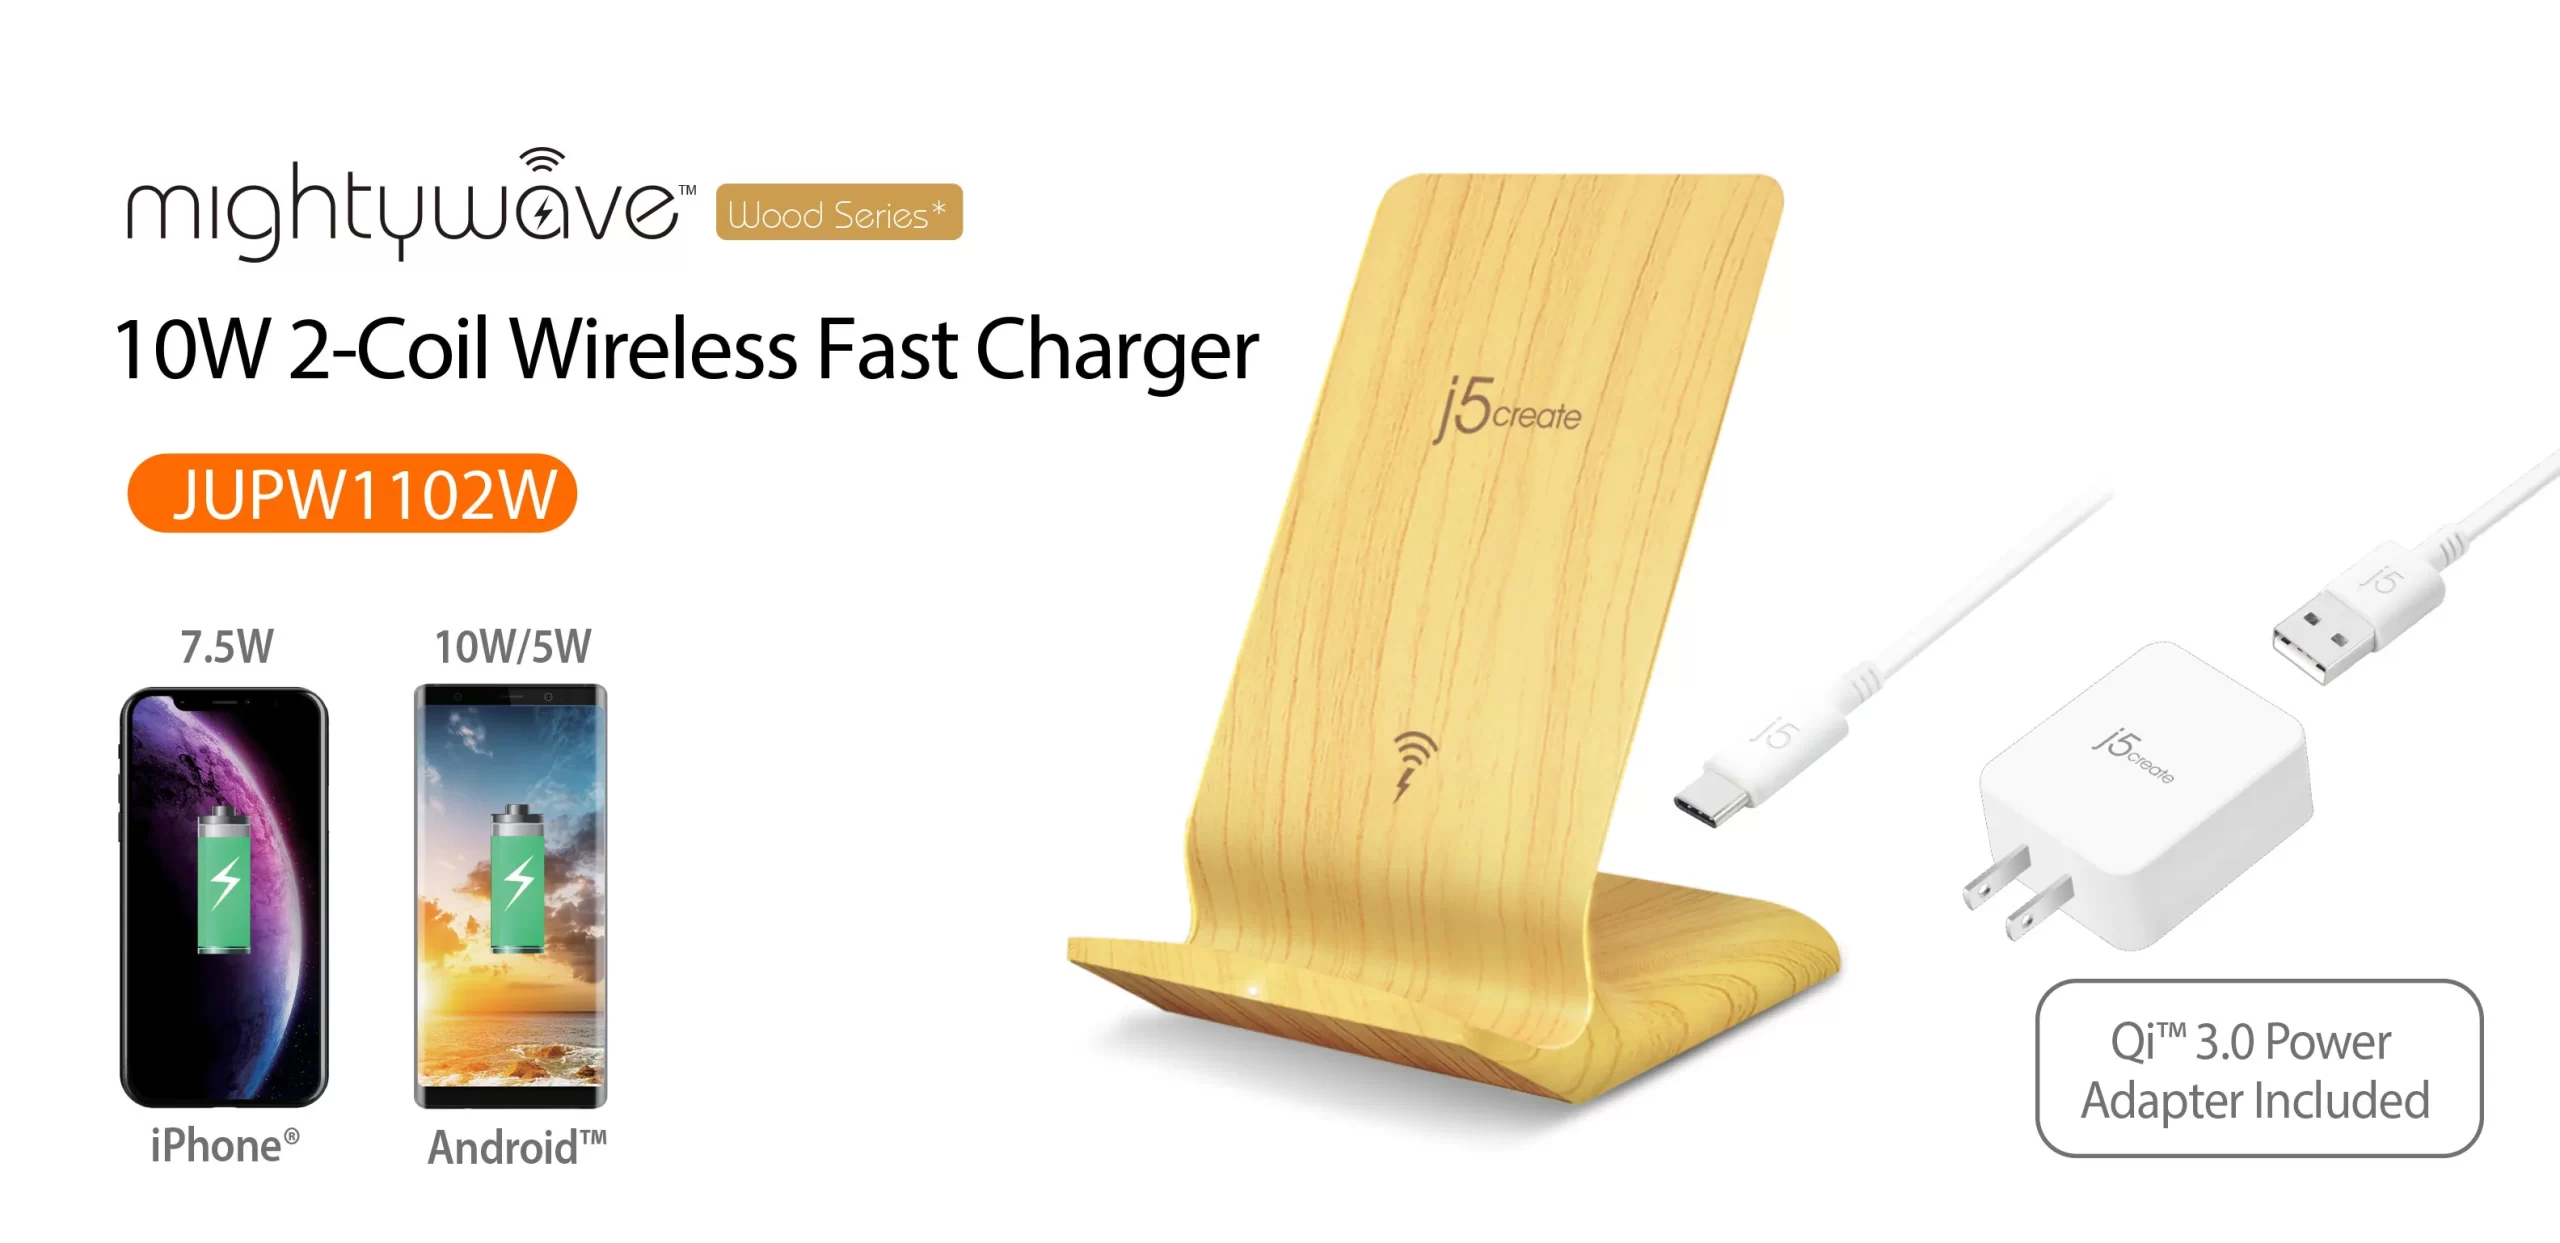 J5 Create Mightywave 10W 2Coil Wireless Fast Charger - JUPW1102W